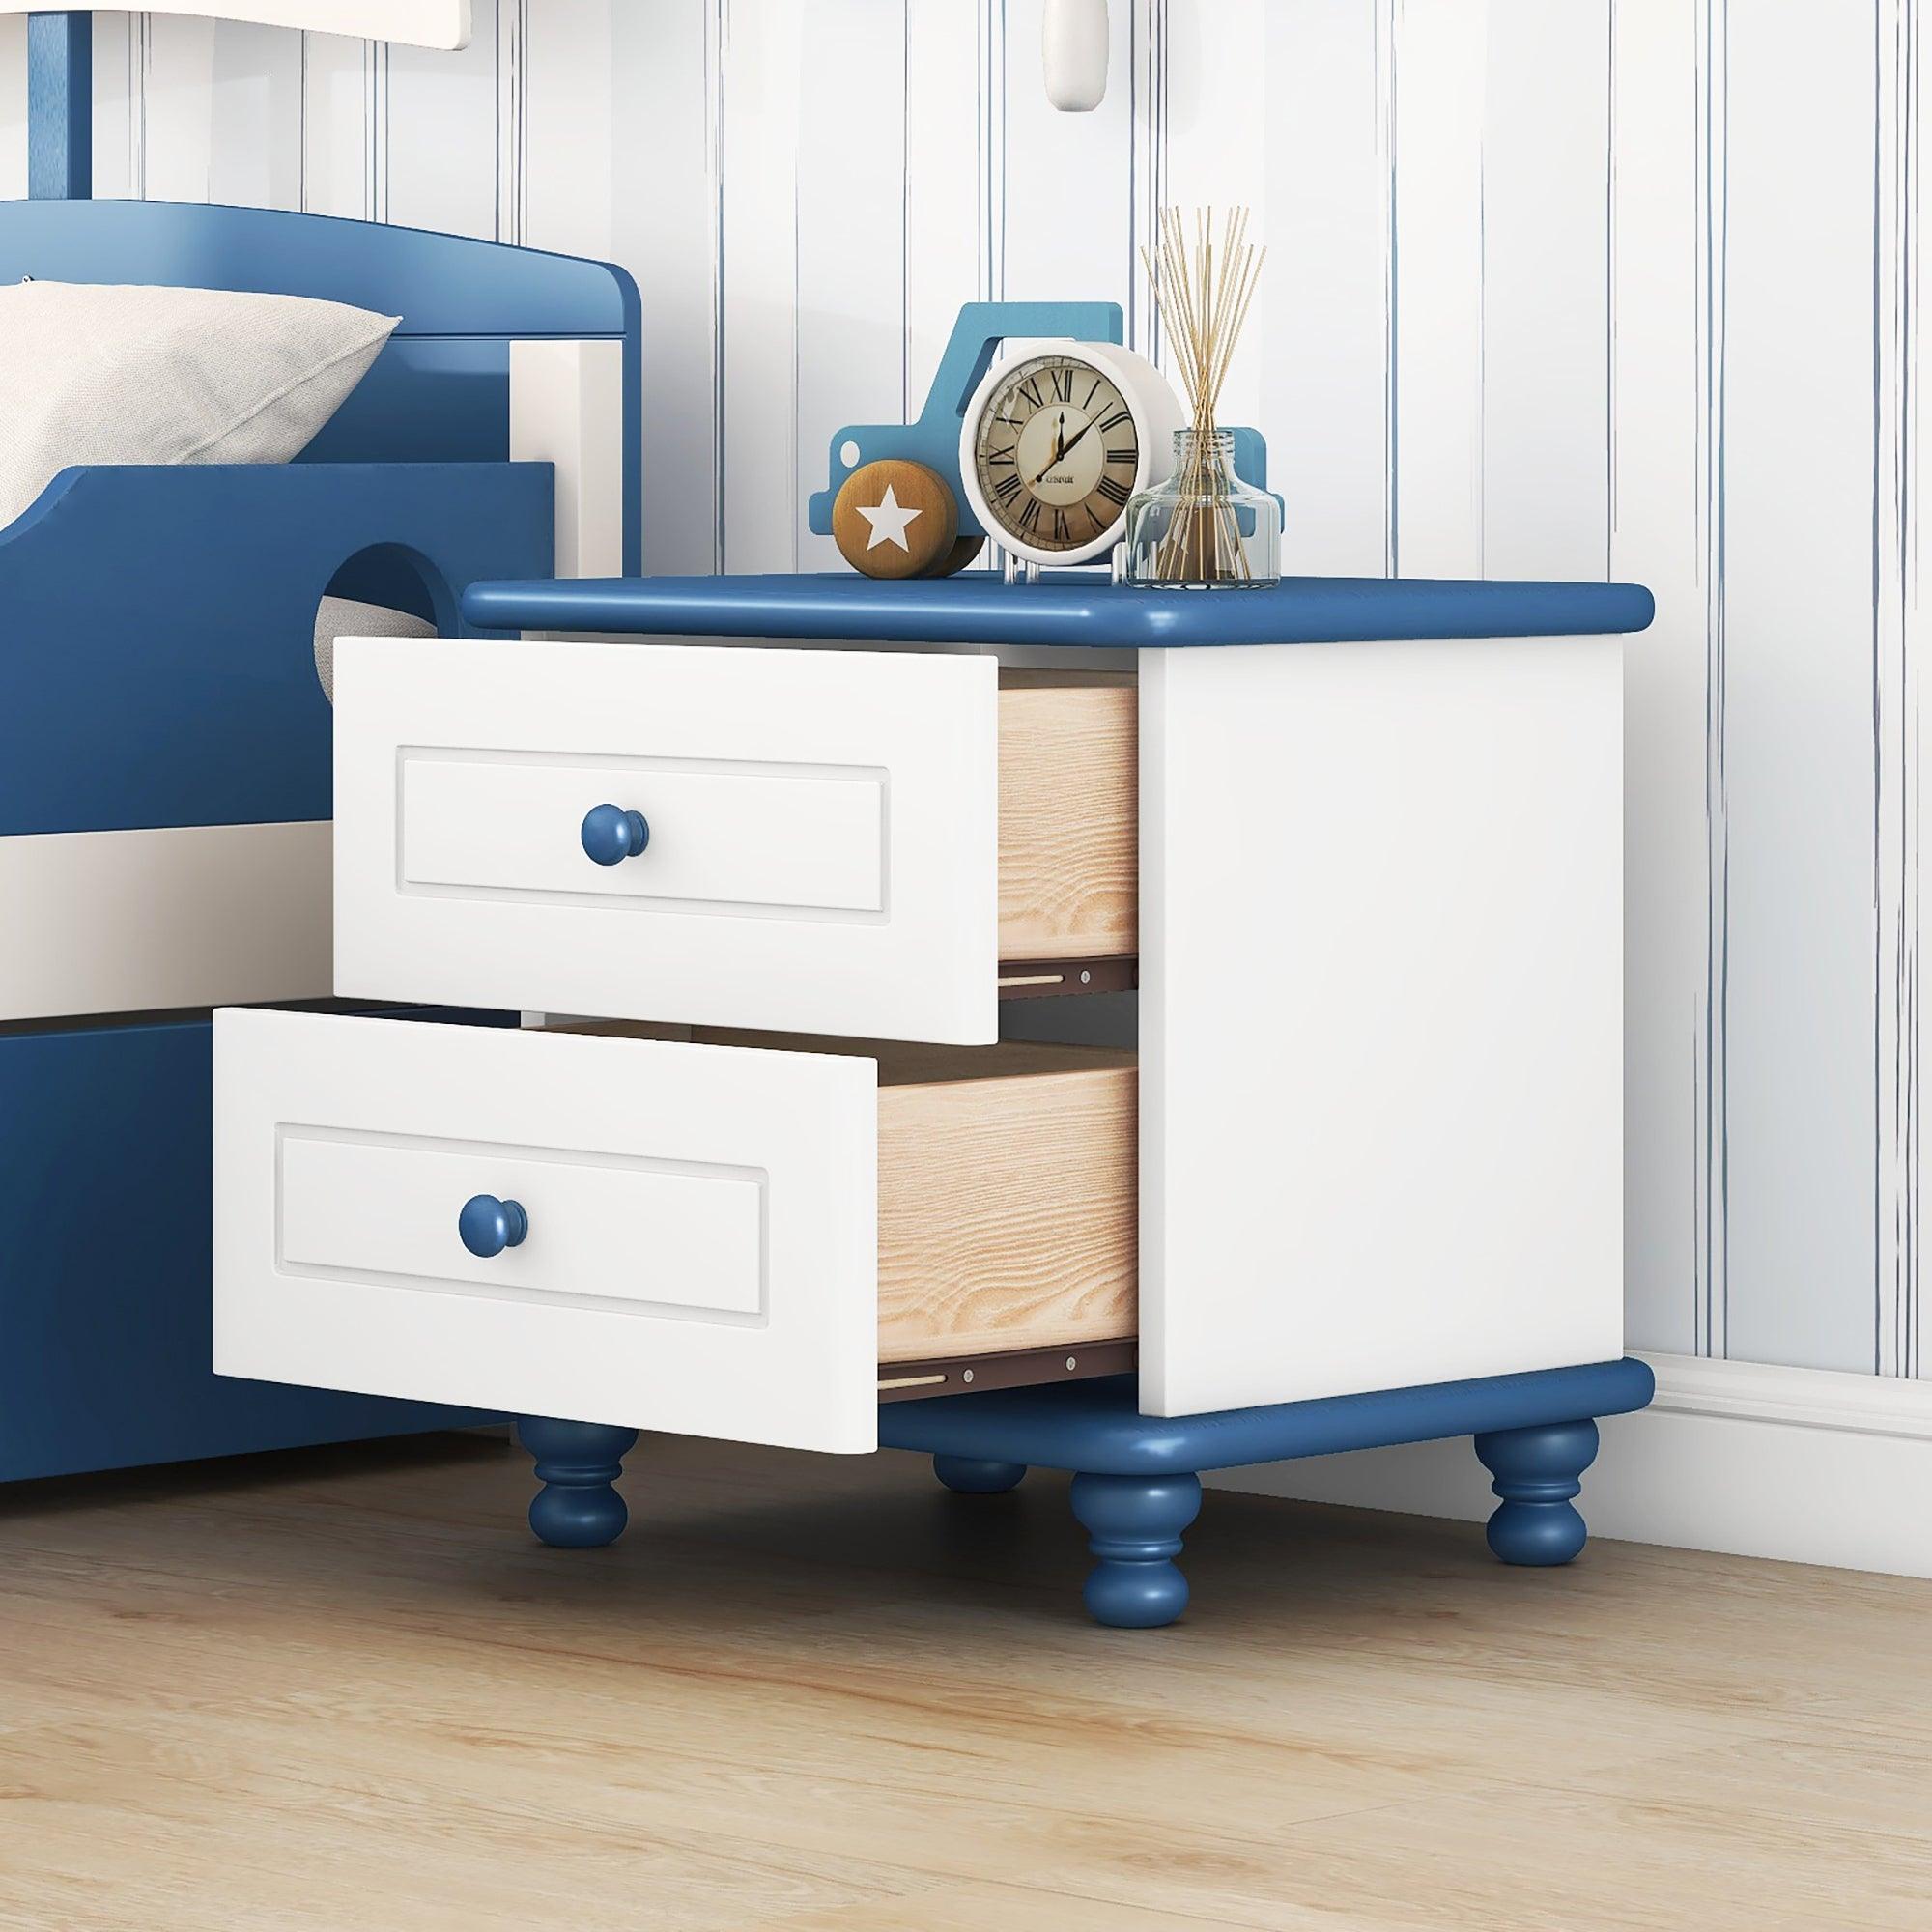 🆓🚛 Jemengro Wooden Nightstand With Two Drawers for Kids - White+Blue